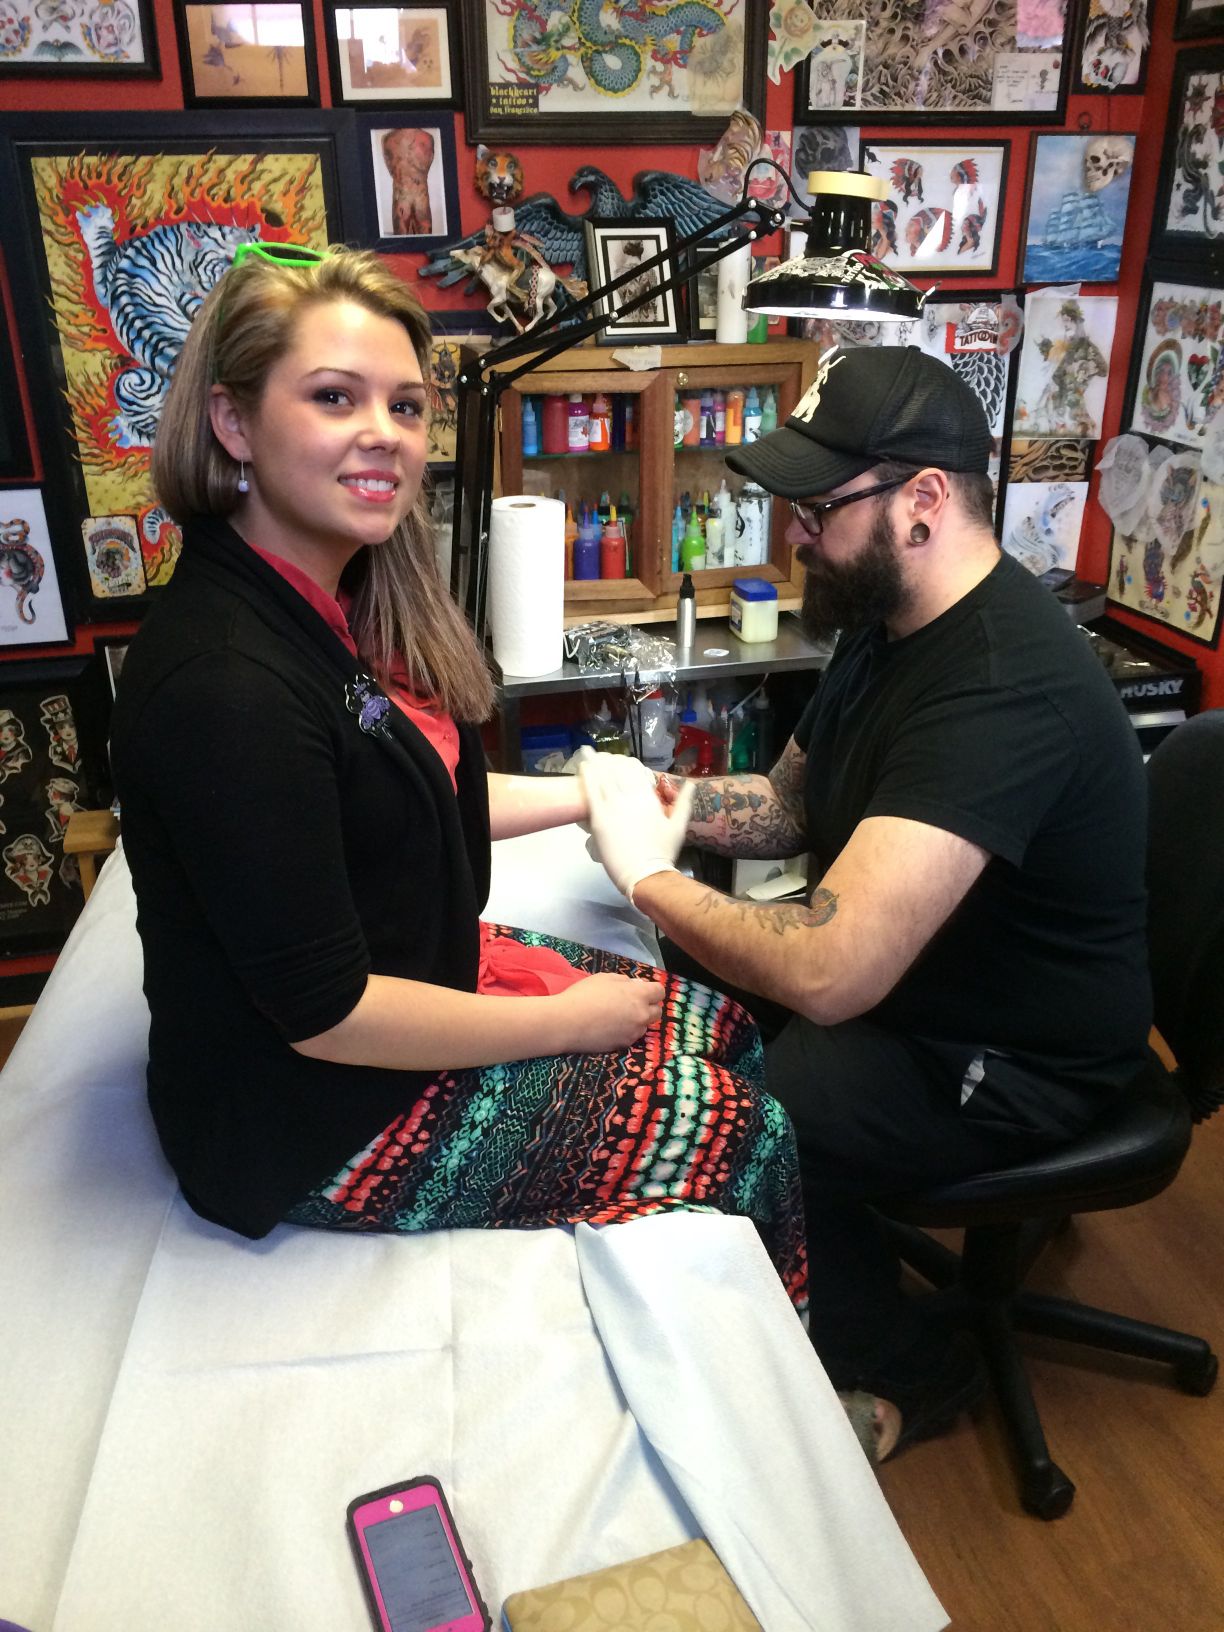 Dukes Mayonnaise partnering with Richmond tattoo shop offering free  mayothemed tattoos  WRIC ABC 8News